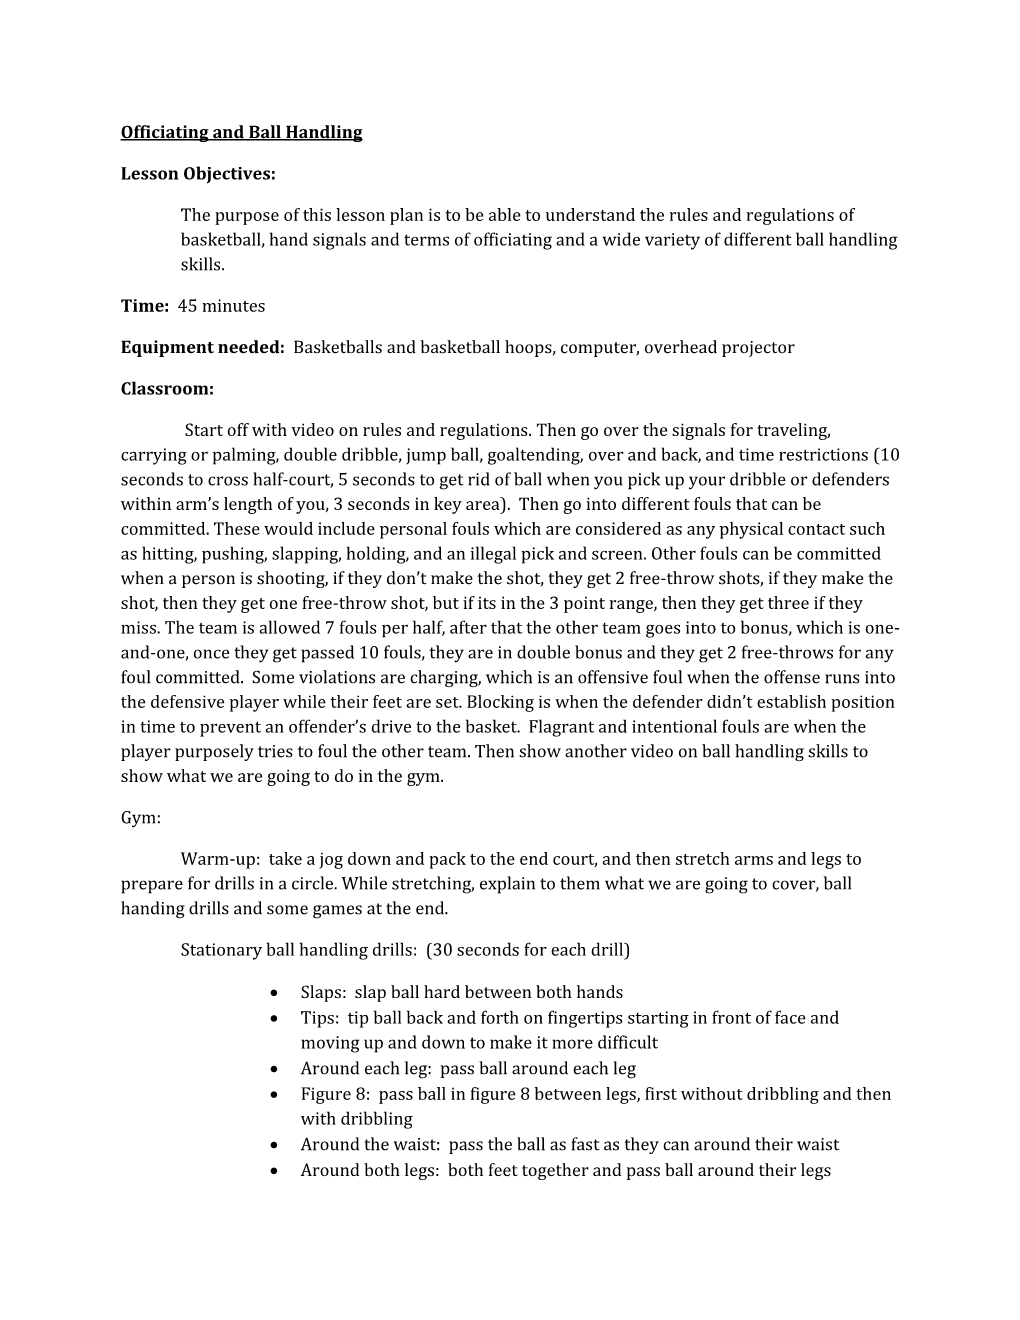 Officiating and Ball Handling Lesson Plan